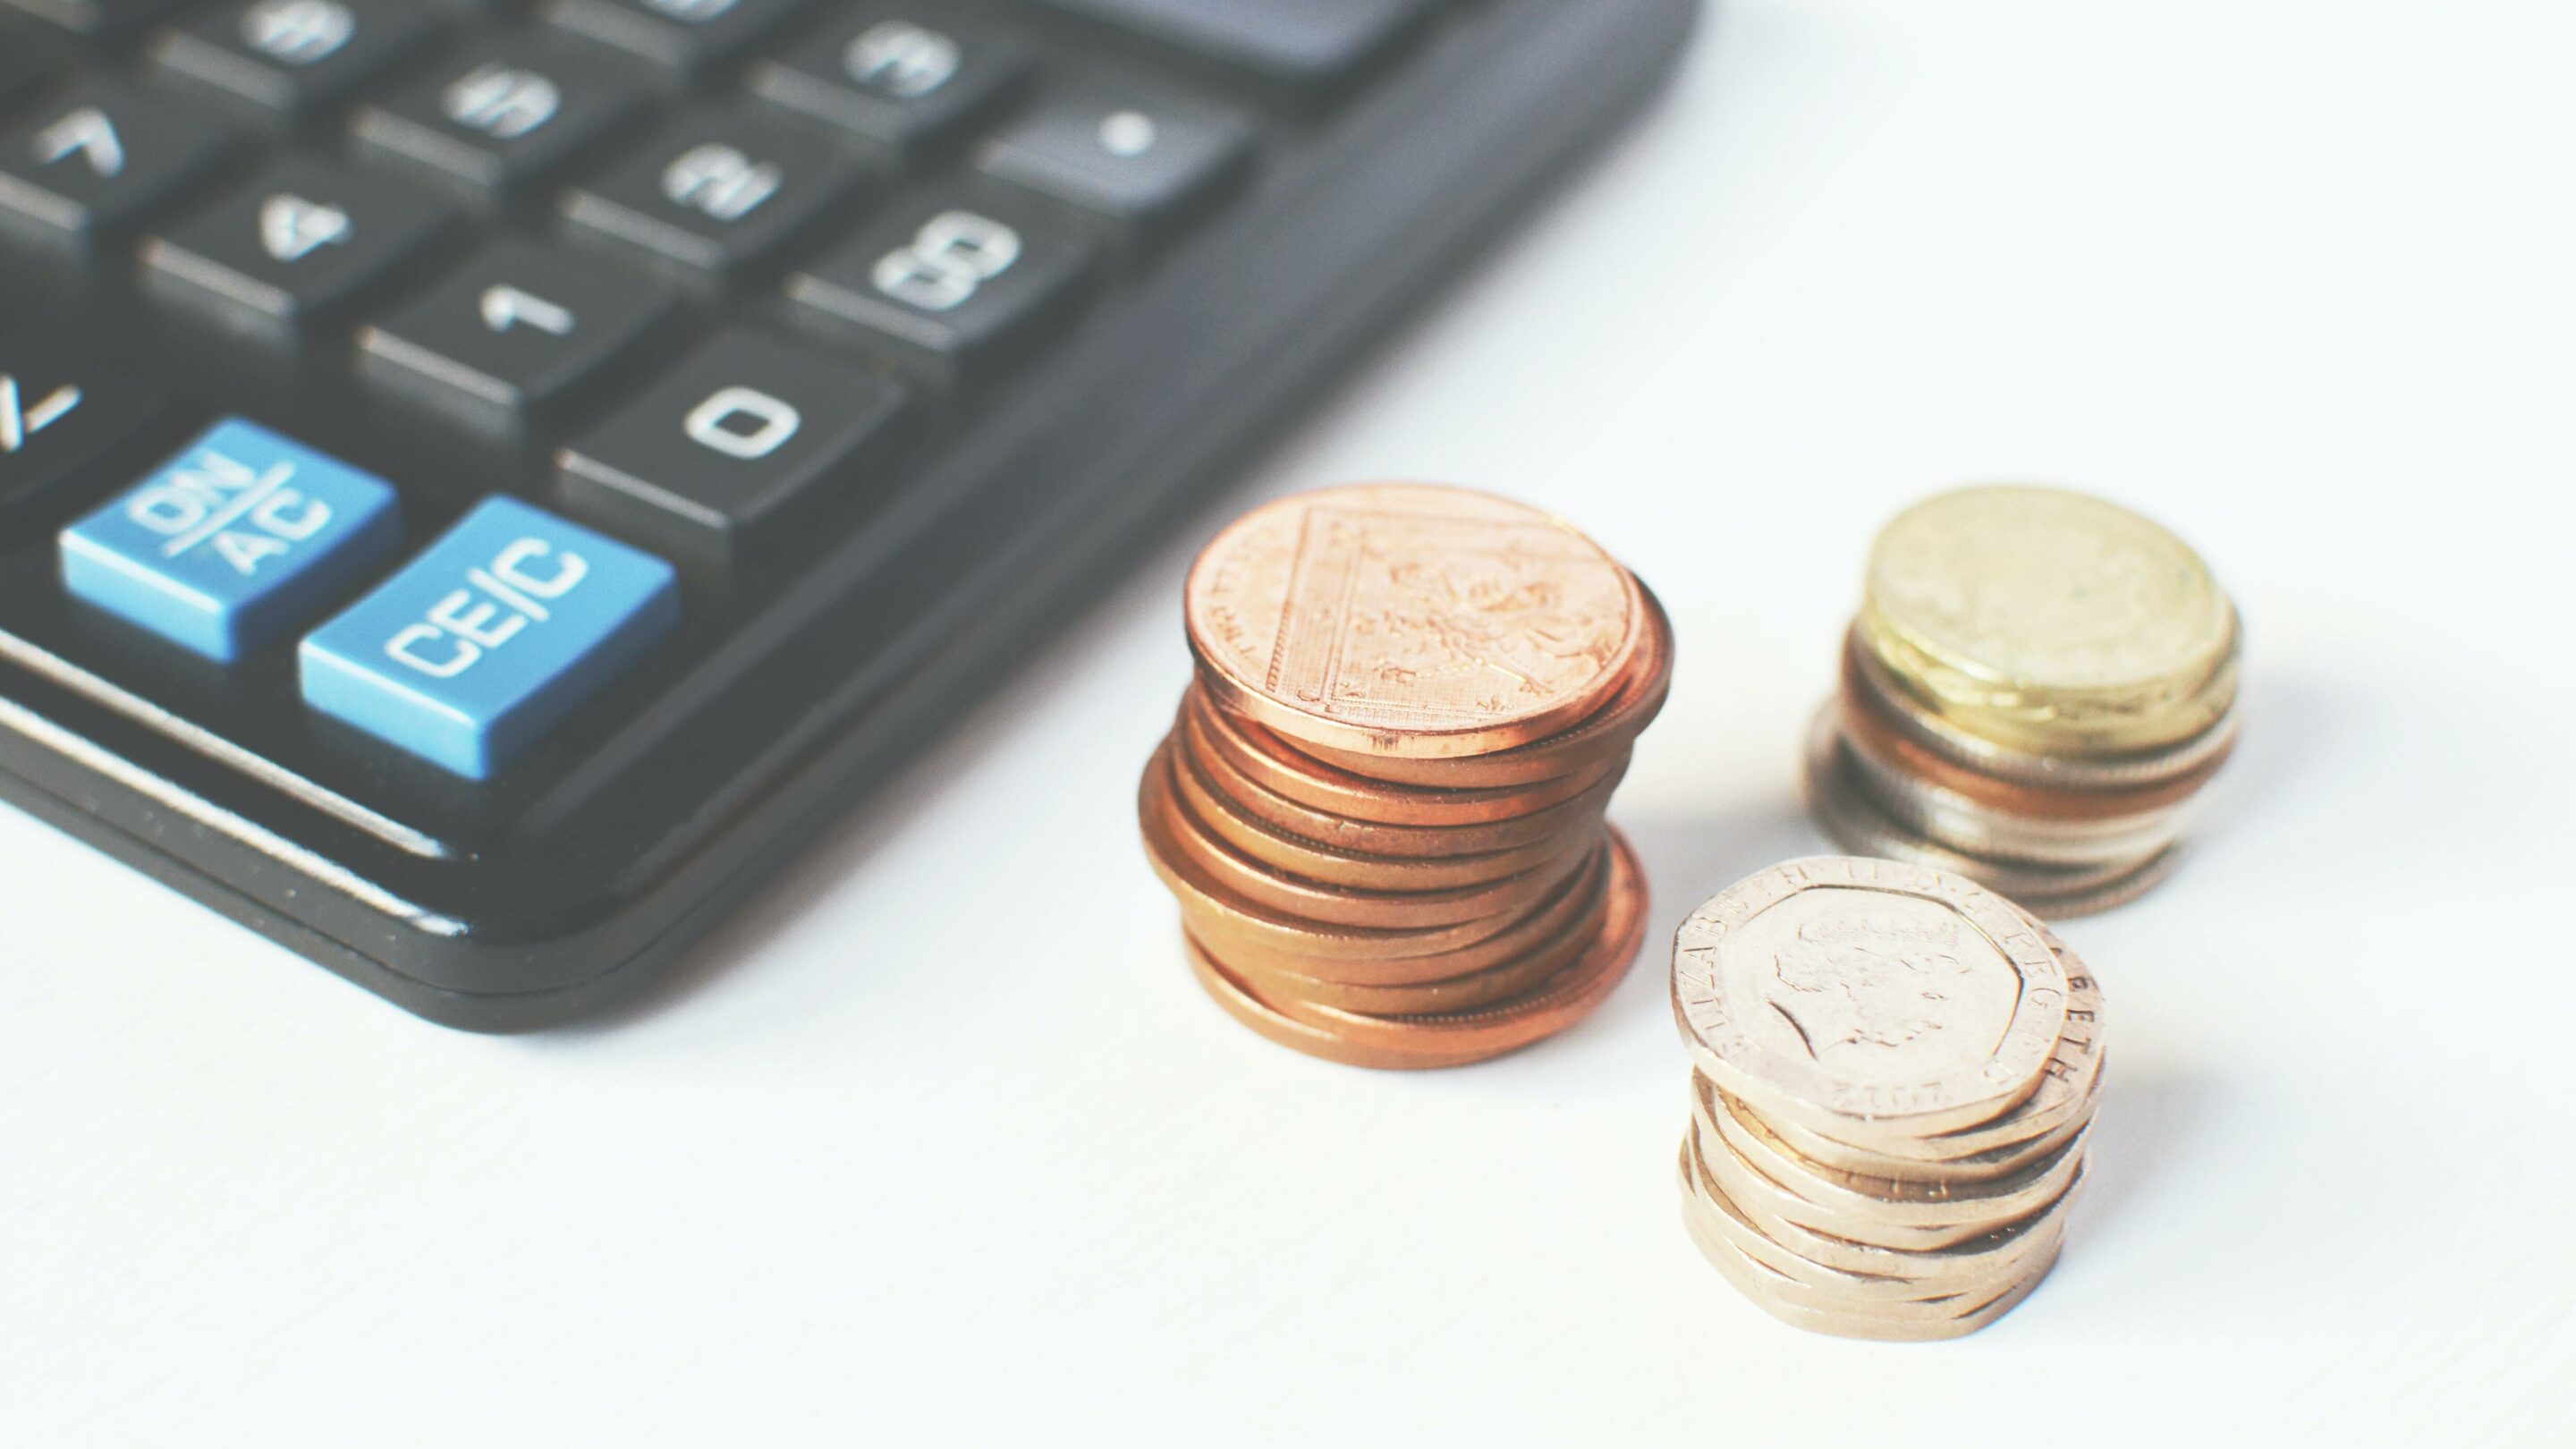 Three stacks of coins, two pennies, twenty pennies and pound coins, with a calculator next to them ready to create a budget.